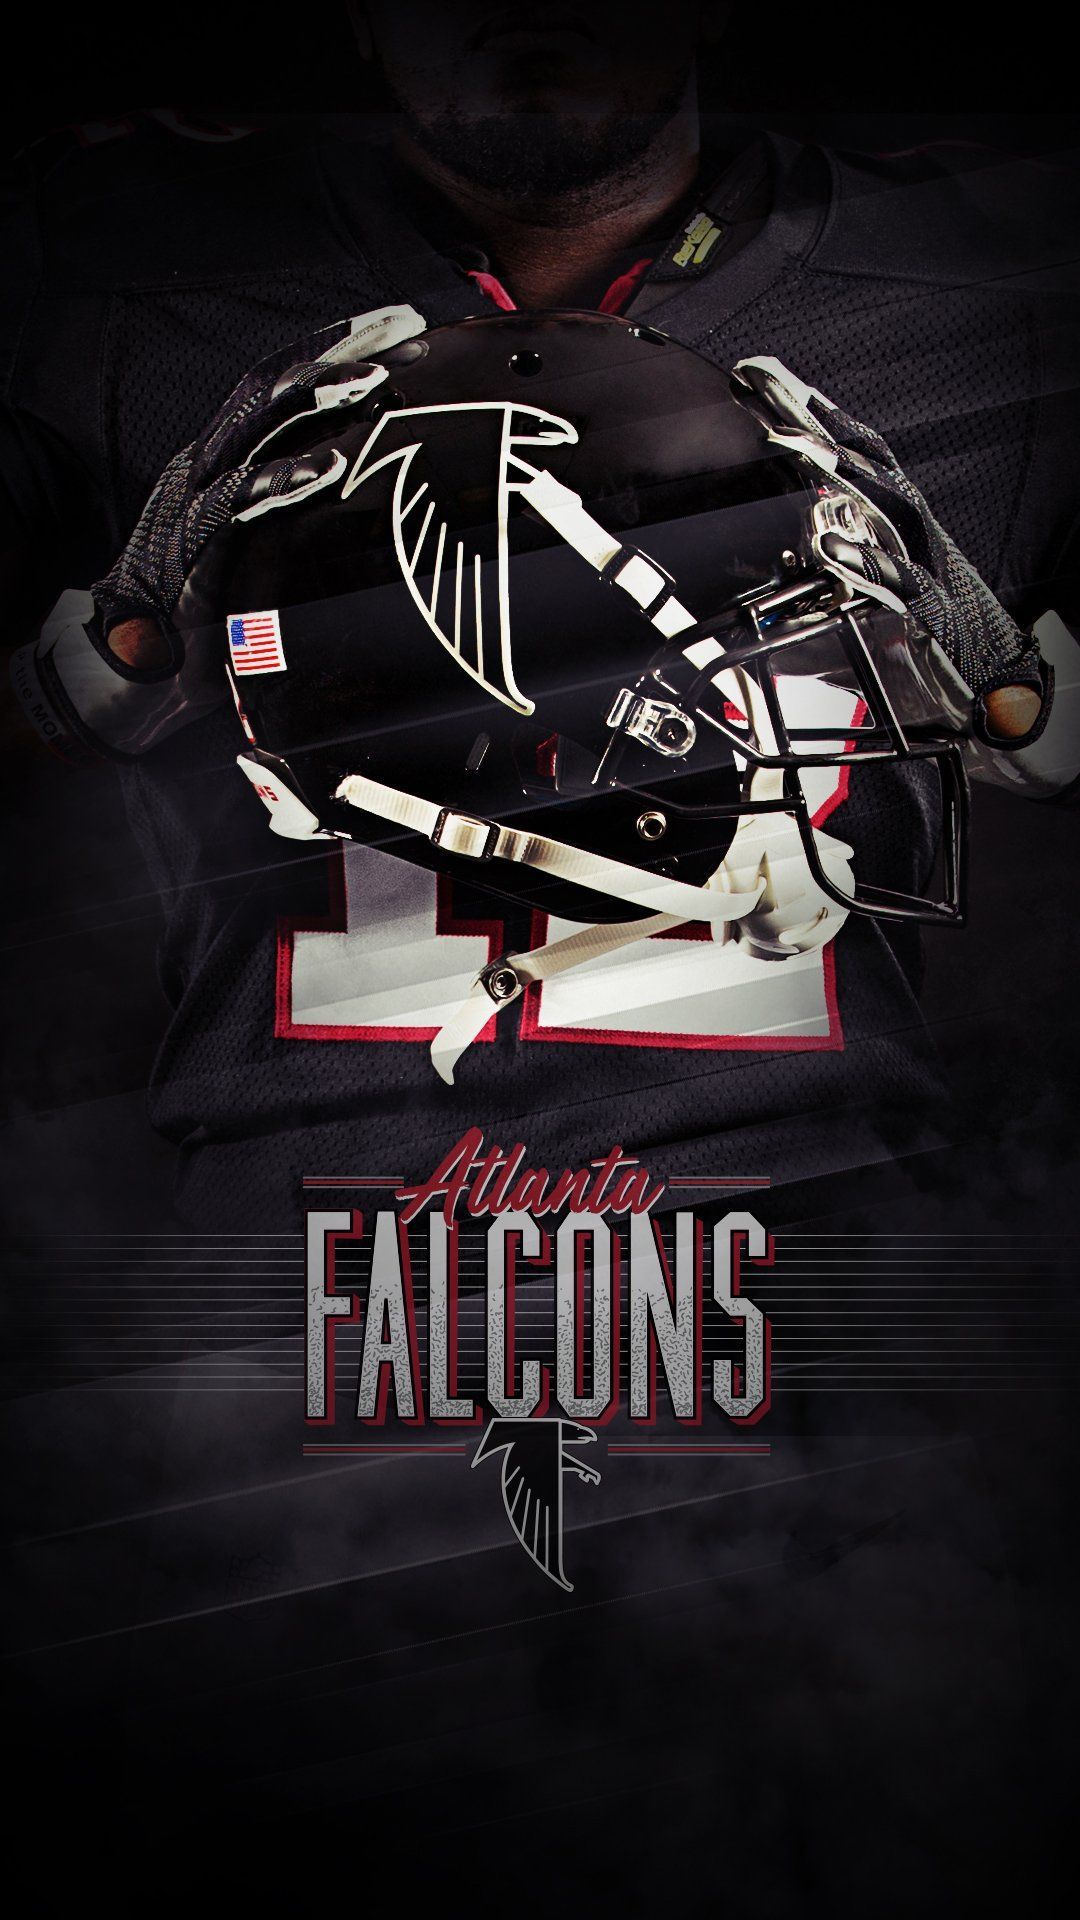 Falcons Wallpapers on WallpaperDog